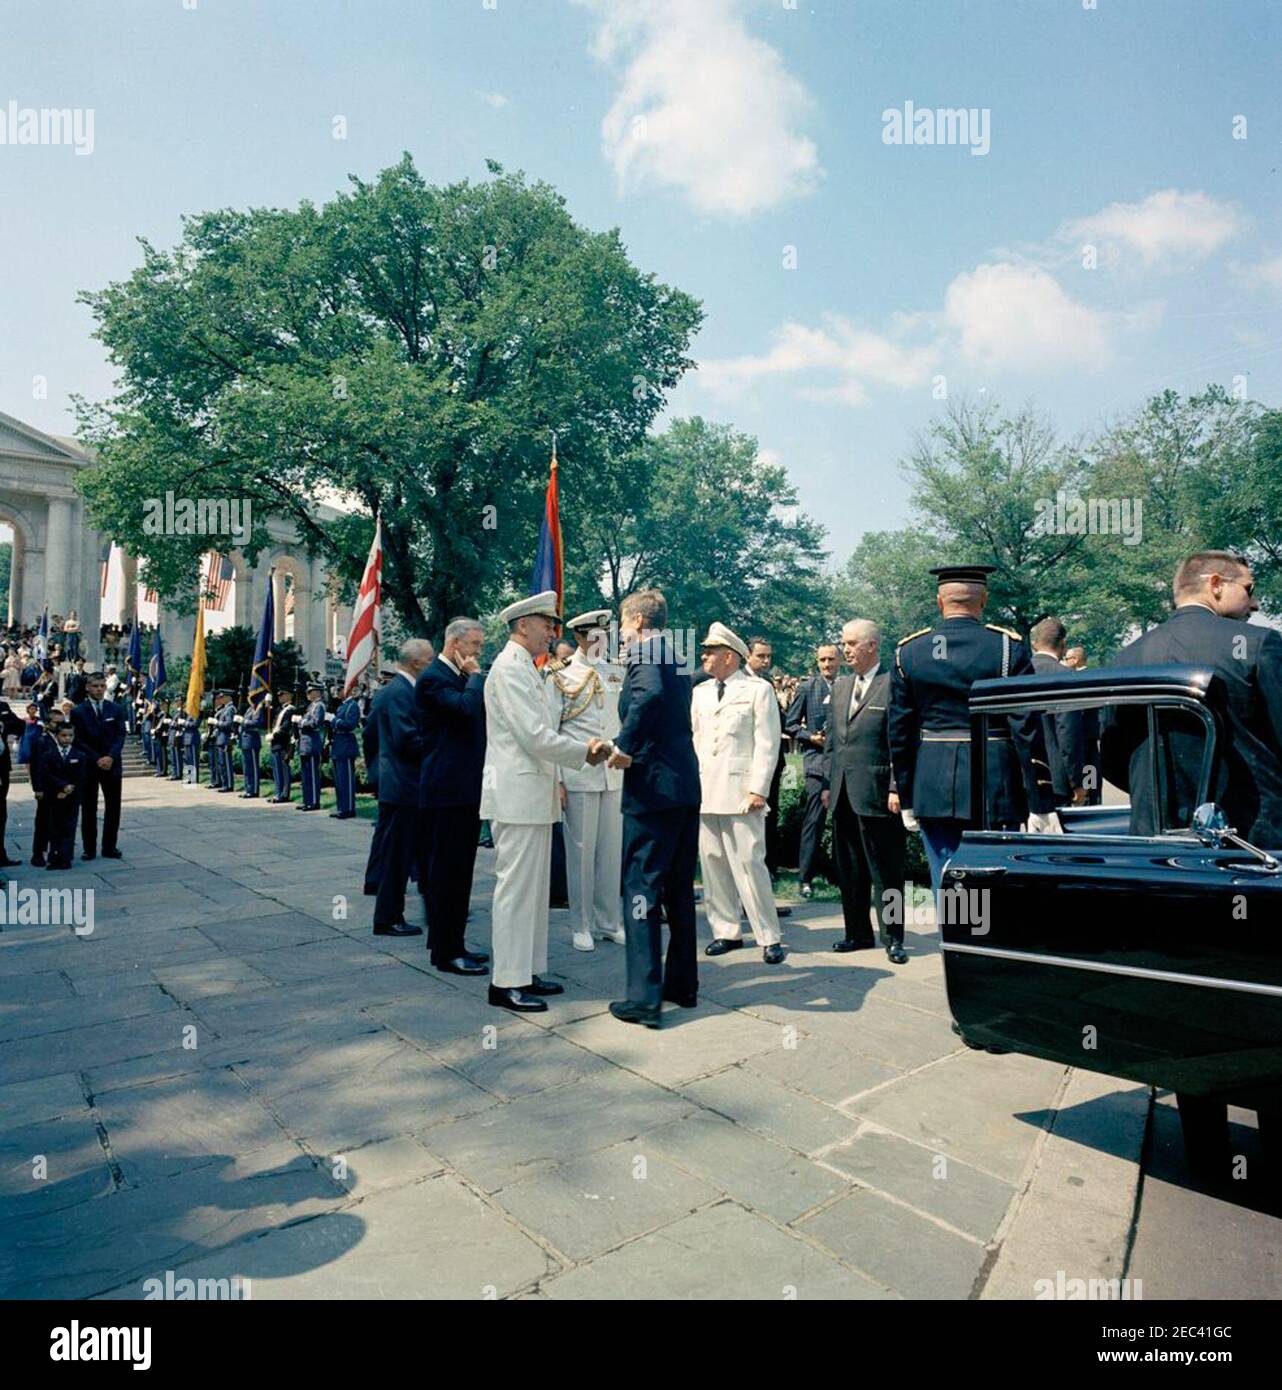 Memorial Day Ceremonies at Arlington National Cemetery, 10:50AM. President John F. Kennedy (center) shakes hands with General Maxwell D. Taylor, following Memorial Day ceremonies at Arlington National Cemetery in Arlington, Virginia. Standing on walkway in center group (L-R): former United States Ambassador to Ireland, Grant Stockdale; General Taylor; Naval Aide to President Kennedy, Captain Tazewell Shepard; the President; Commanding General of the Military District of Washington, Major General Paul A. Gavan; Assistant Press Secretary, Malcolm Kilduff; Administrator of the Veterans Administra Stock Photo